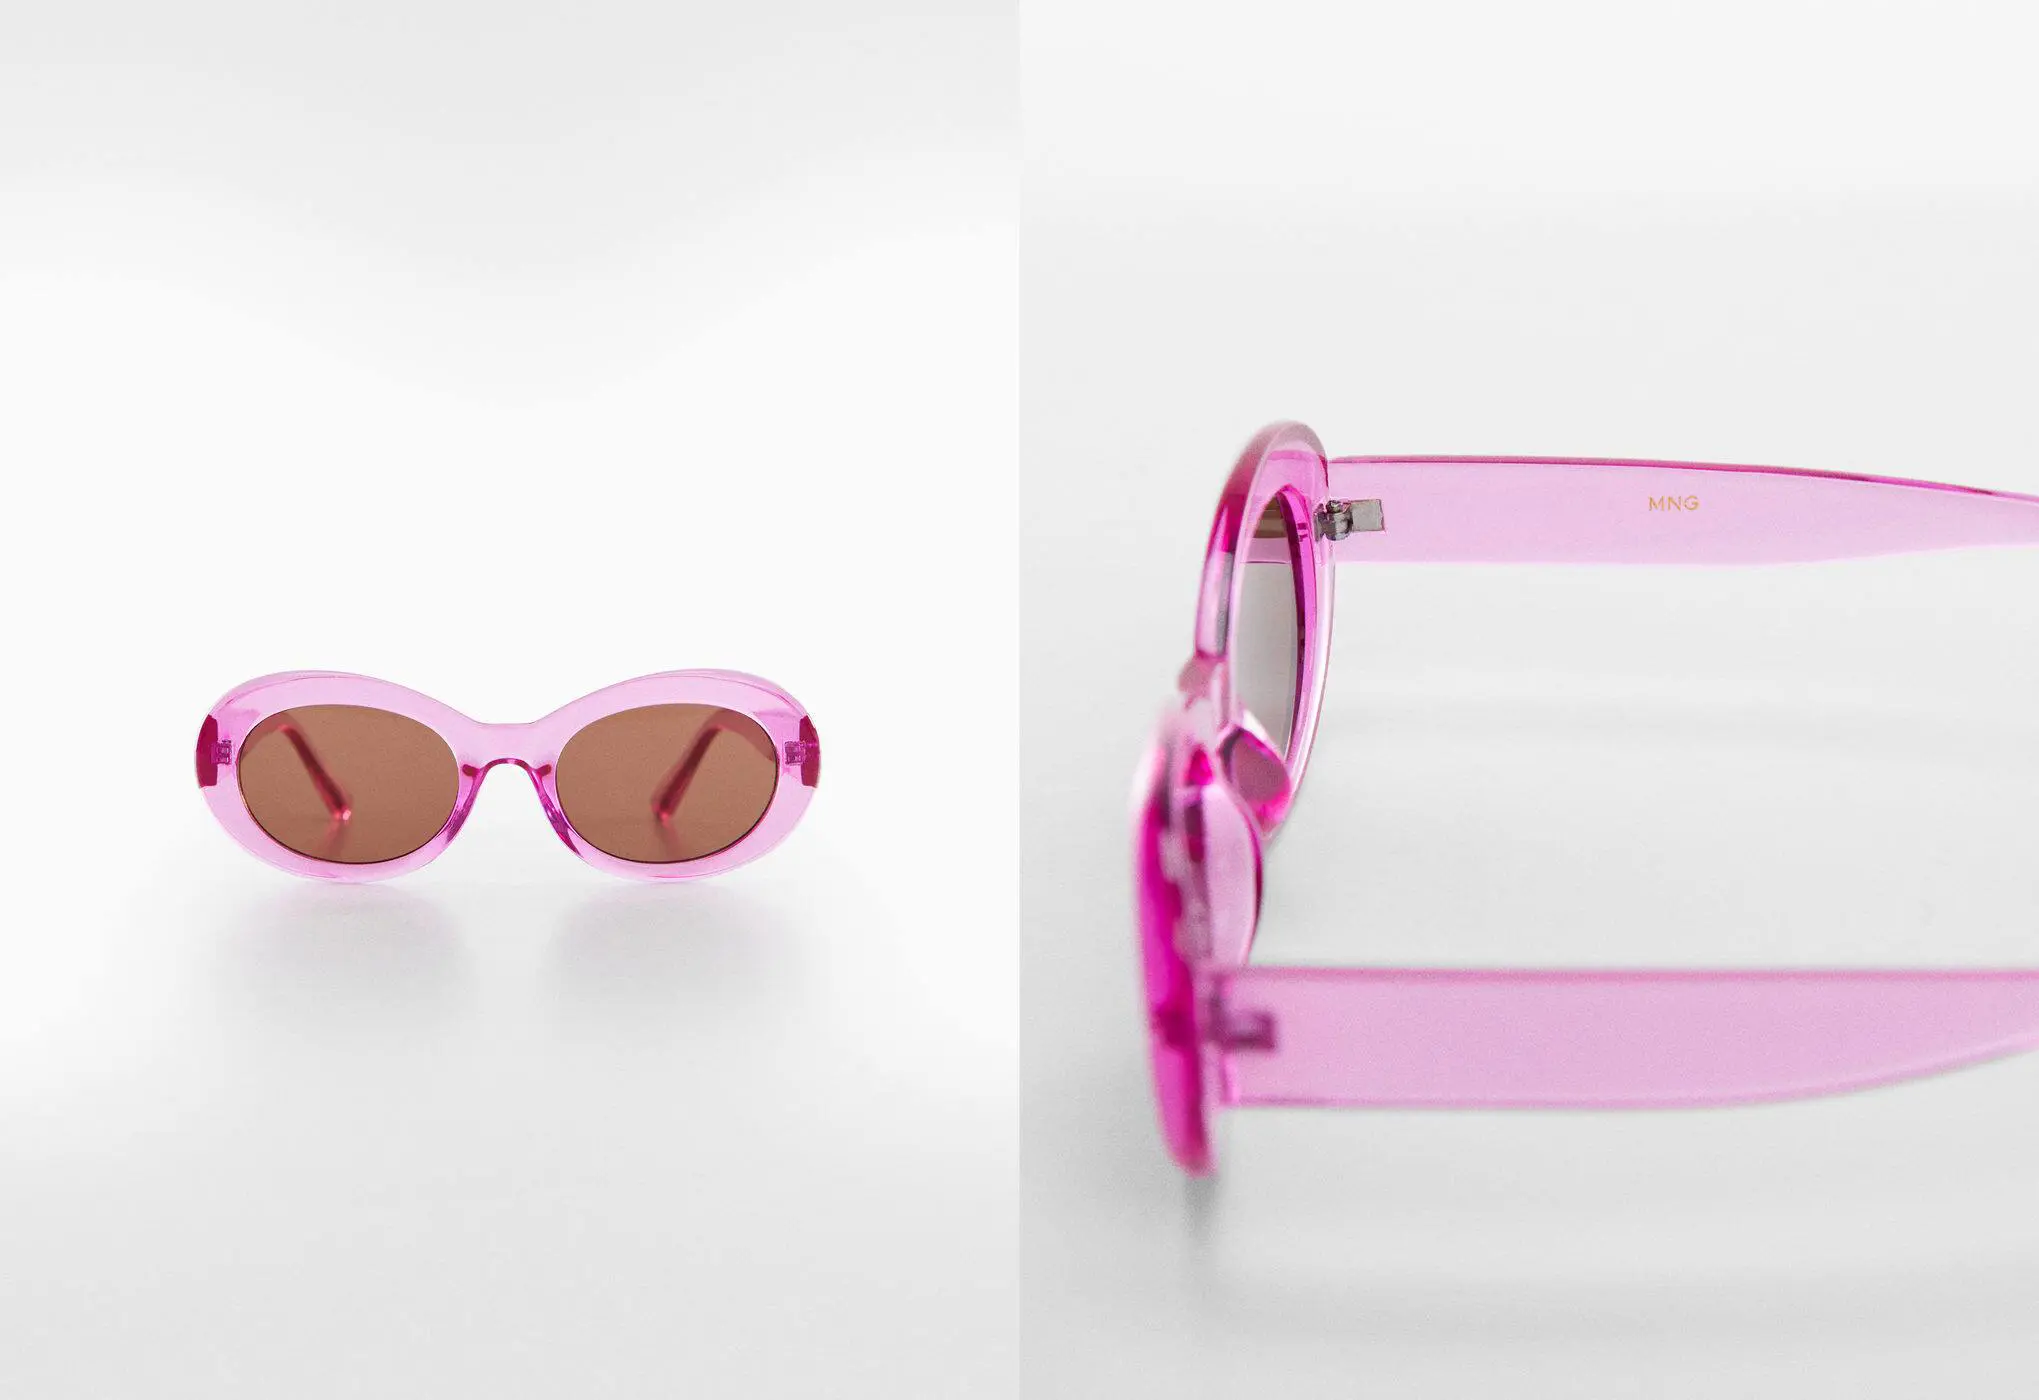 Mango Semi-transparent frame sunglasses. a pair of pink sunglasses sitting on top of a table. 